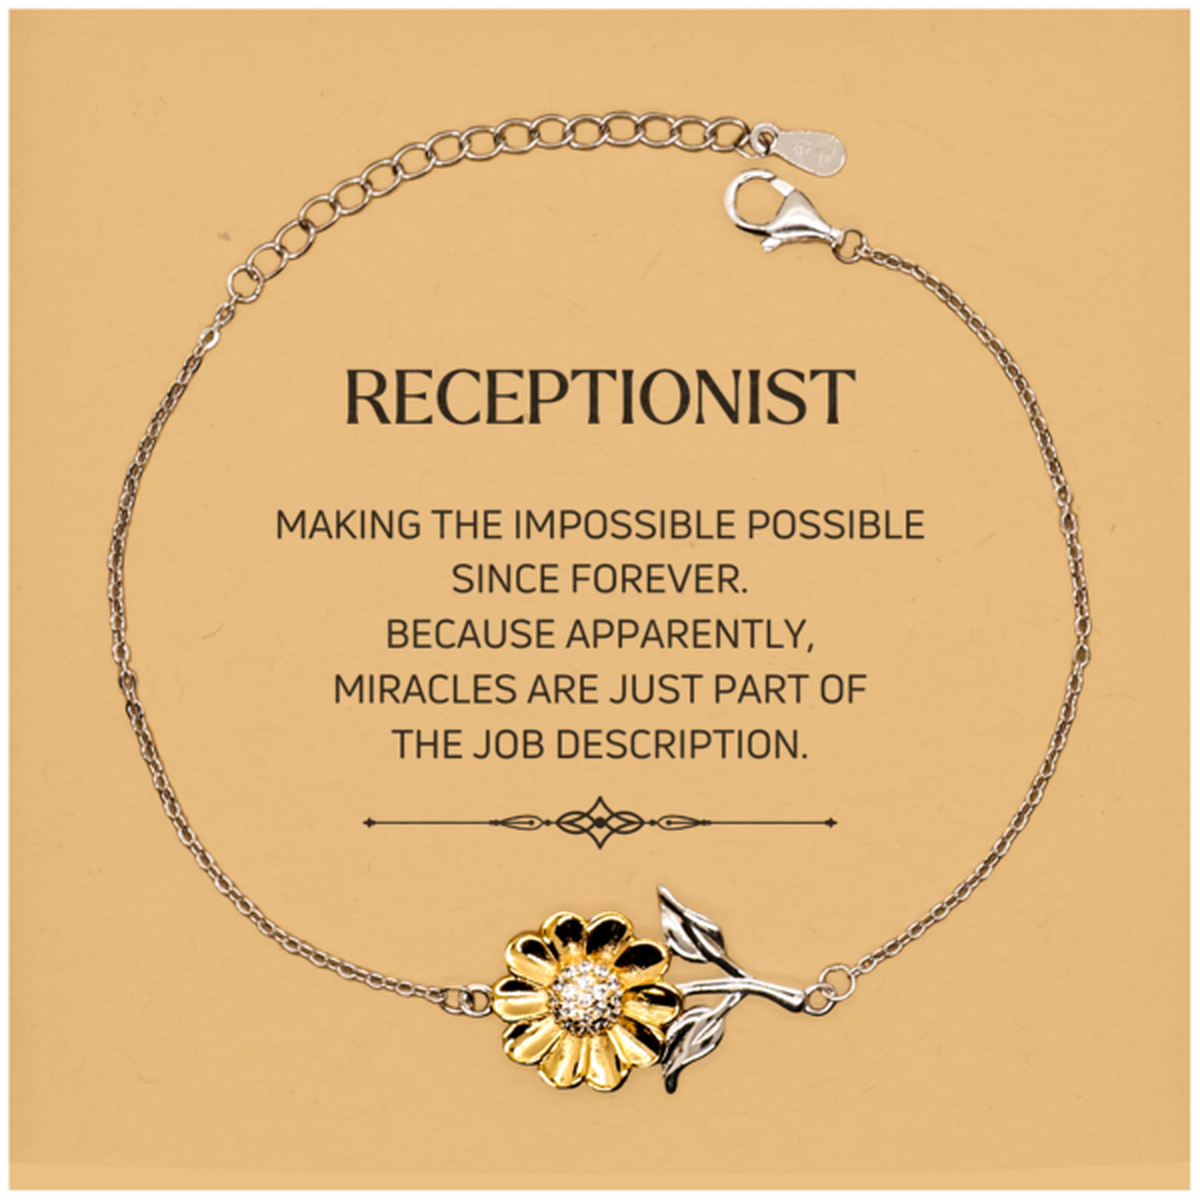 Funny Receptionist Gifts, Miracles are just part of the job description, Inspirational Birthday Christmas Sunflower Bracelet For Receptionist, Men, Women, Coworkers, Friends, Boss